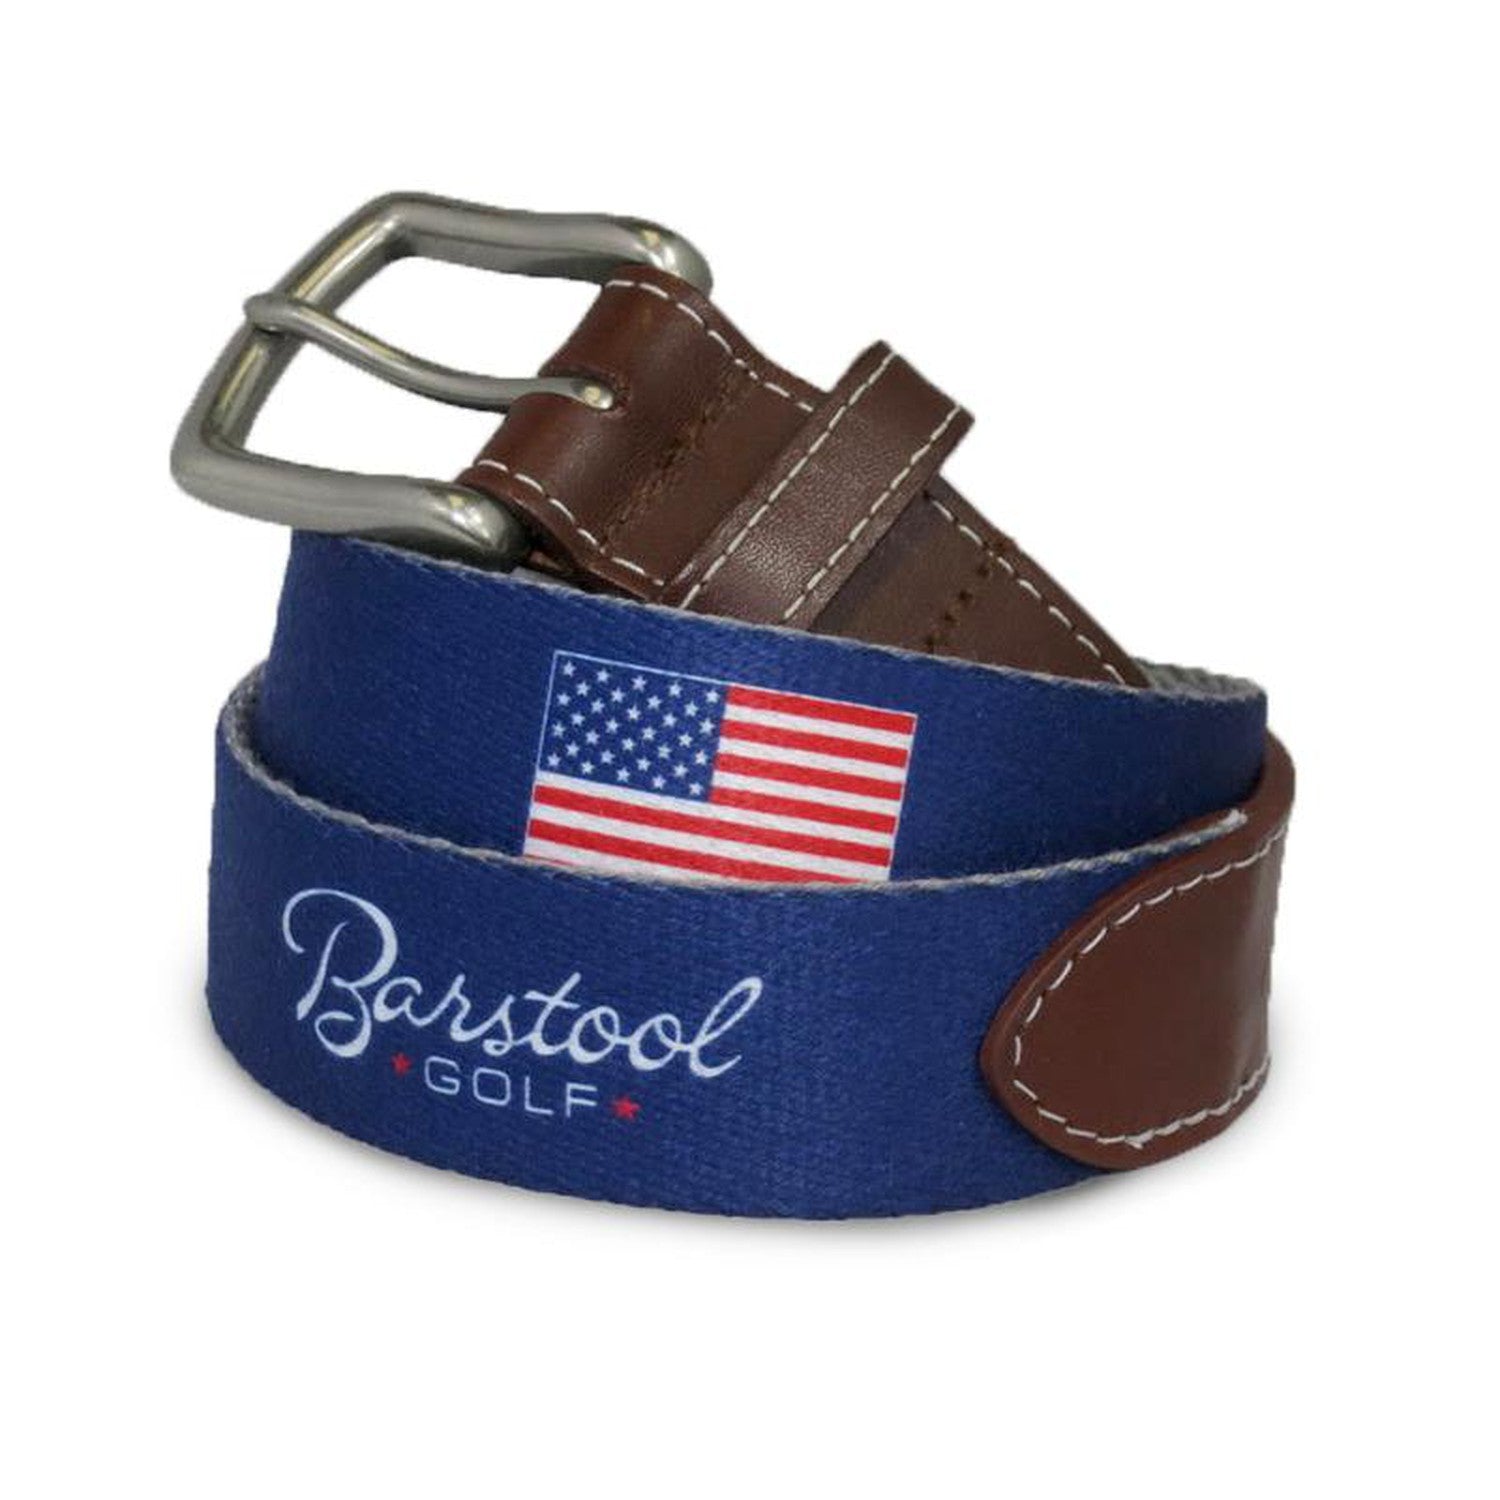 Peter Millar x Barstool Golf Belt - Fore Play Podcast Accessories, Clothing  & Merch – Barstool Sports